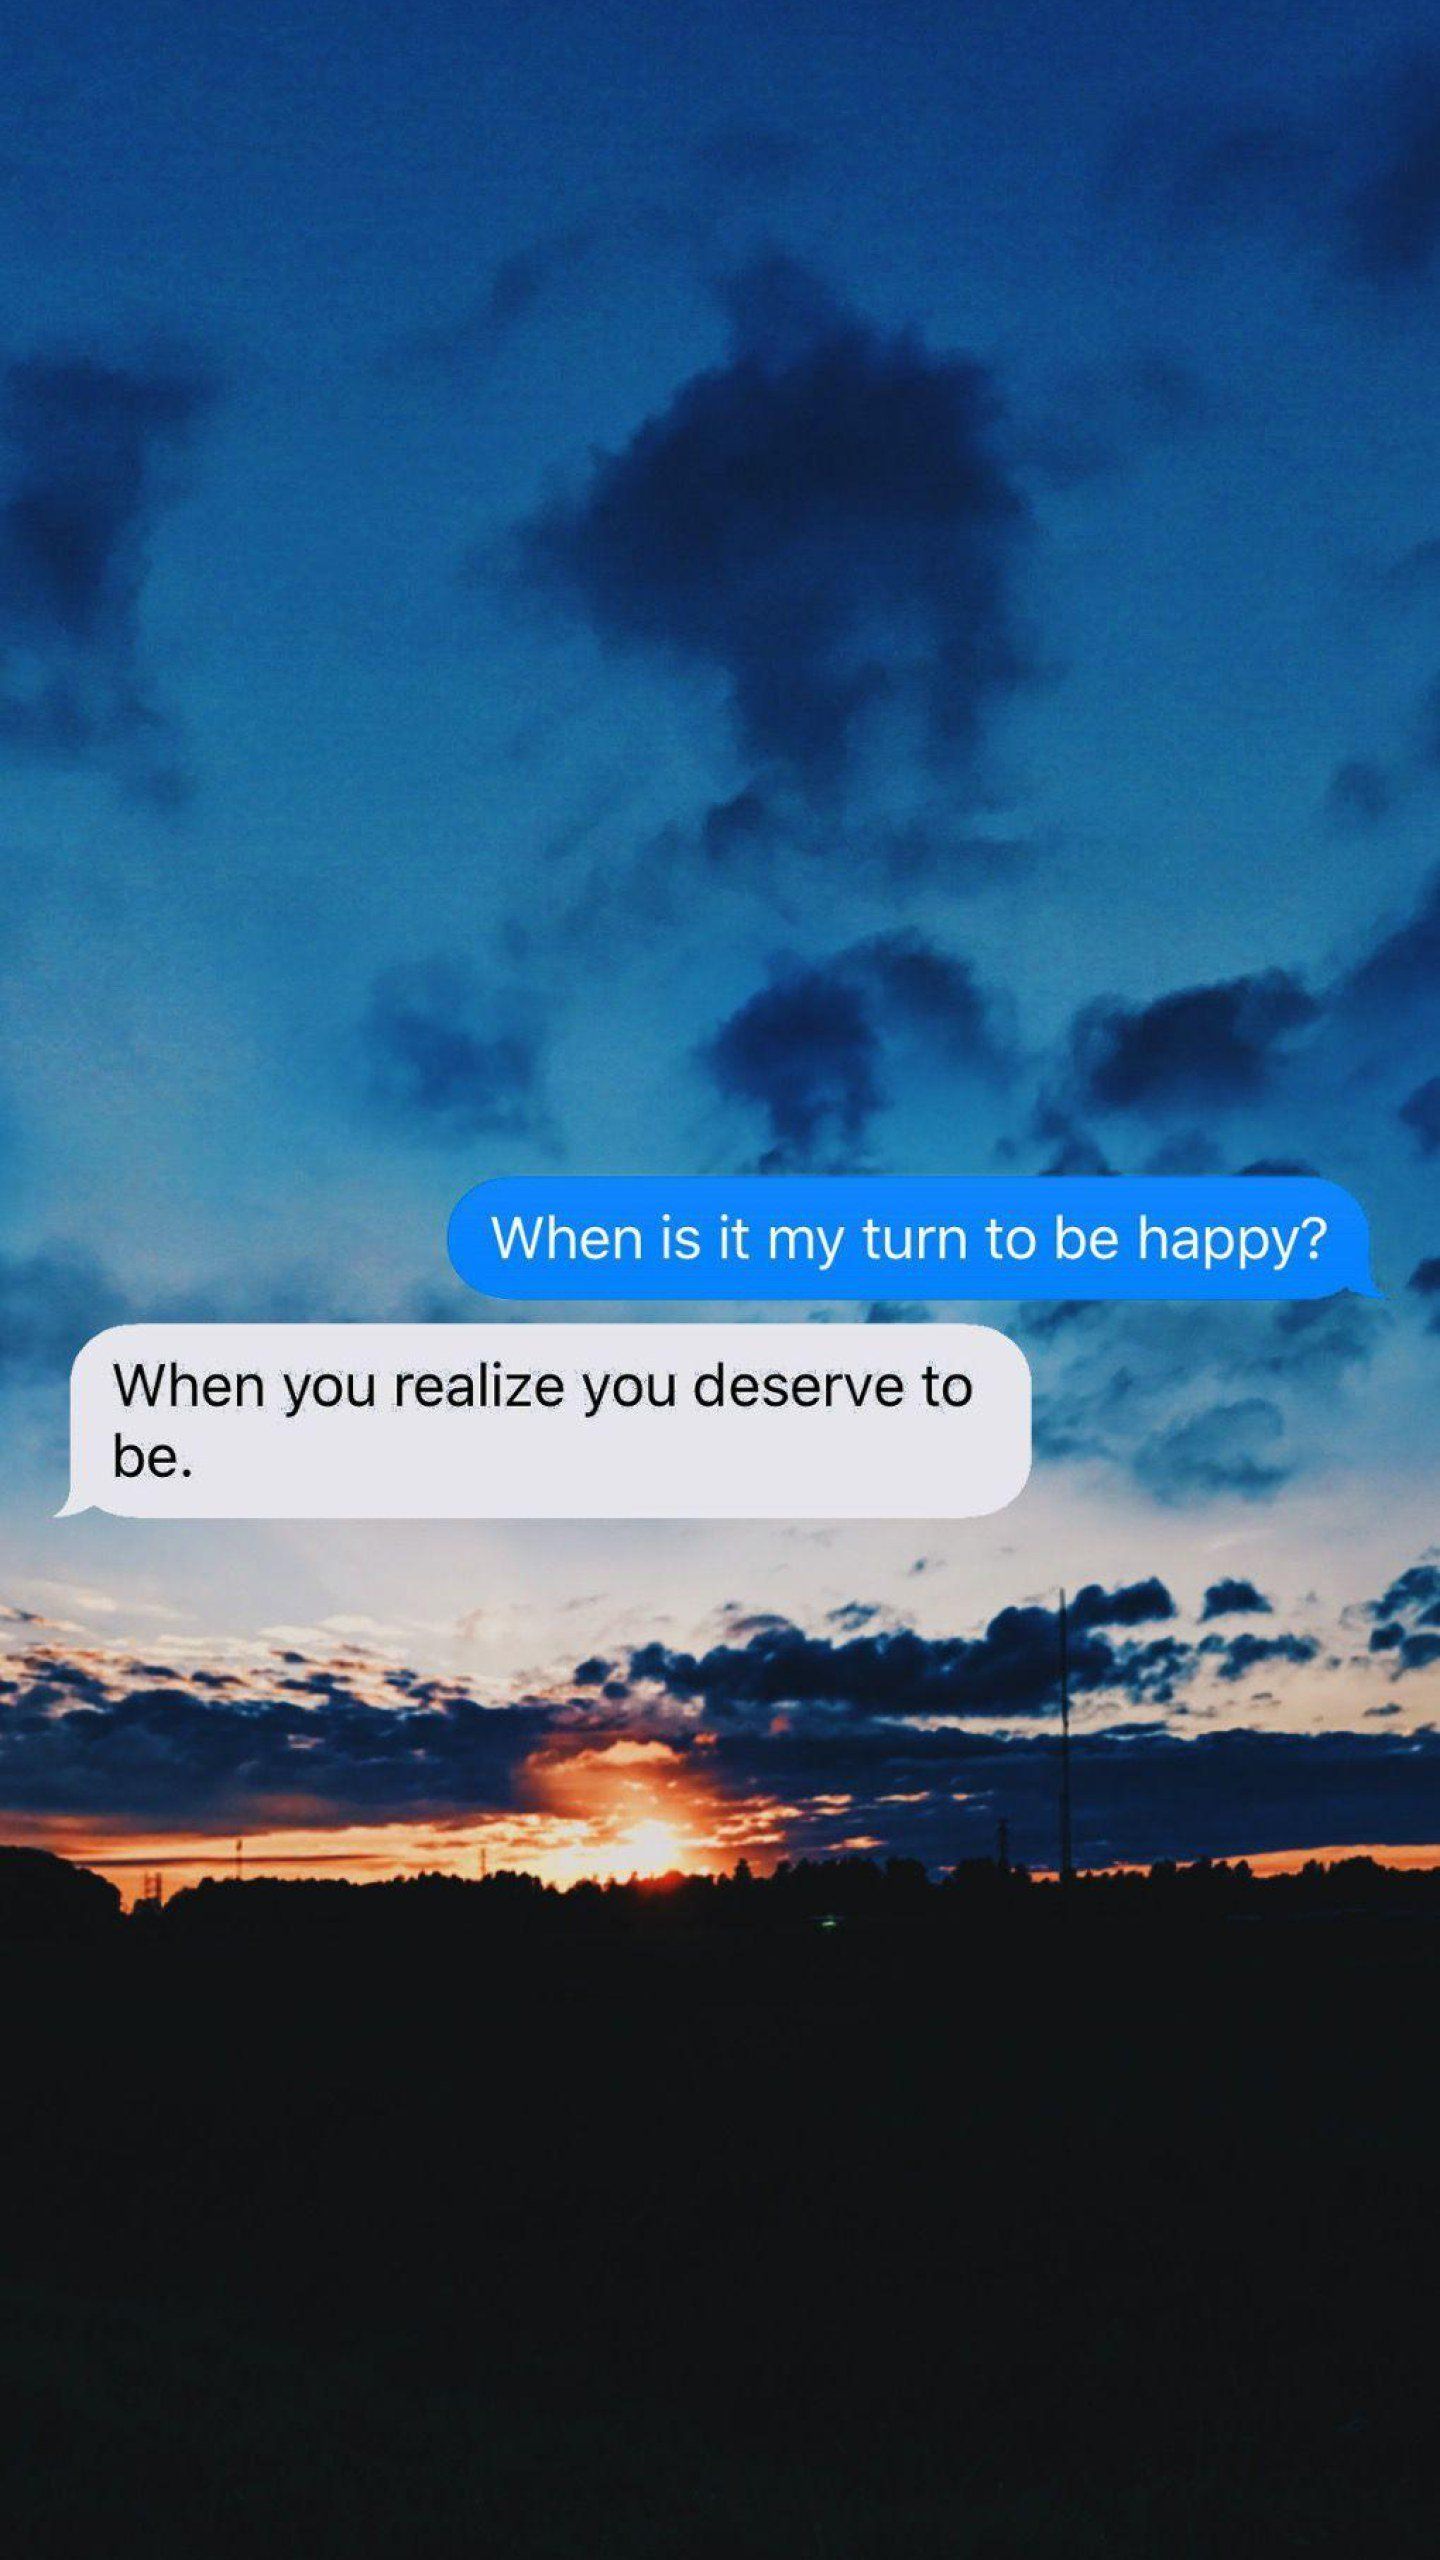 A text message that says when is it time to get happy - Sad, sad quotes, depressing, couple, cool